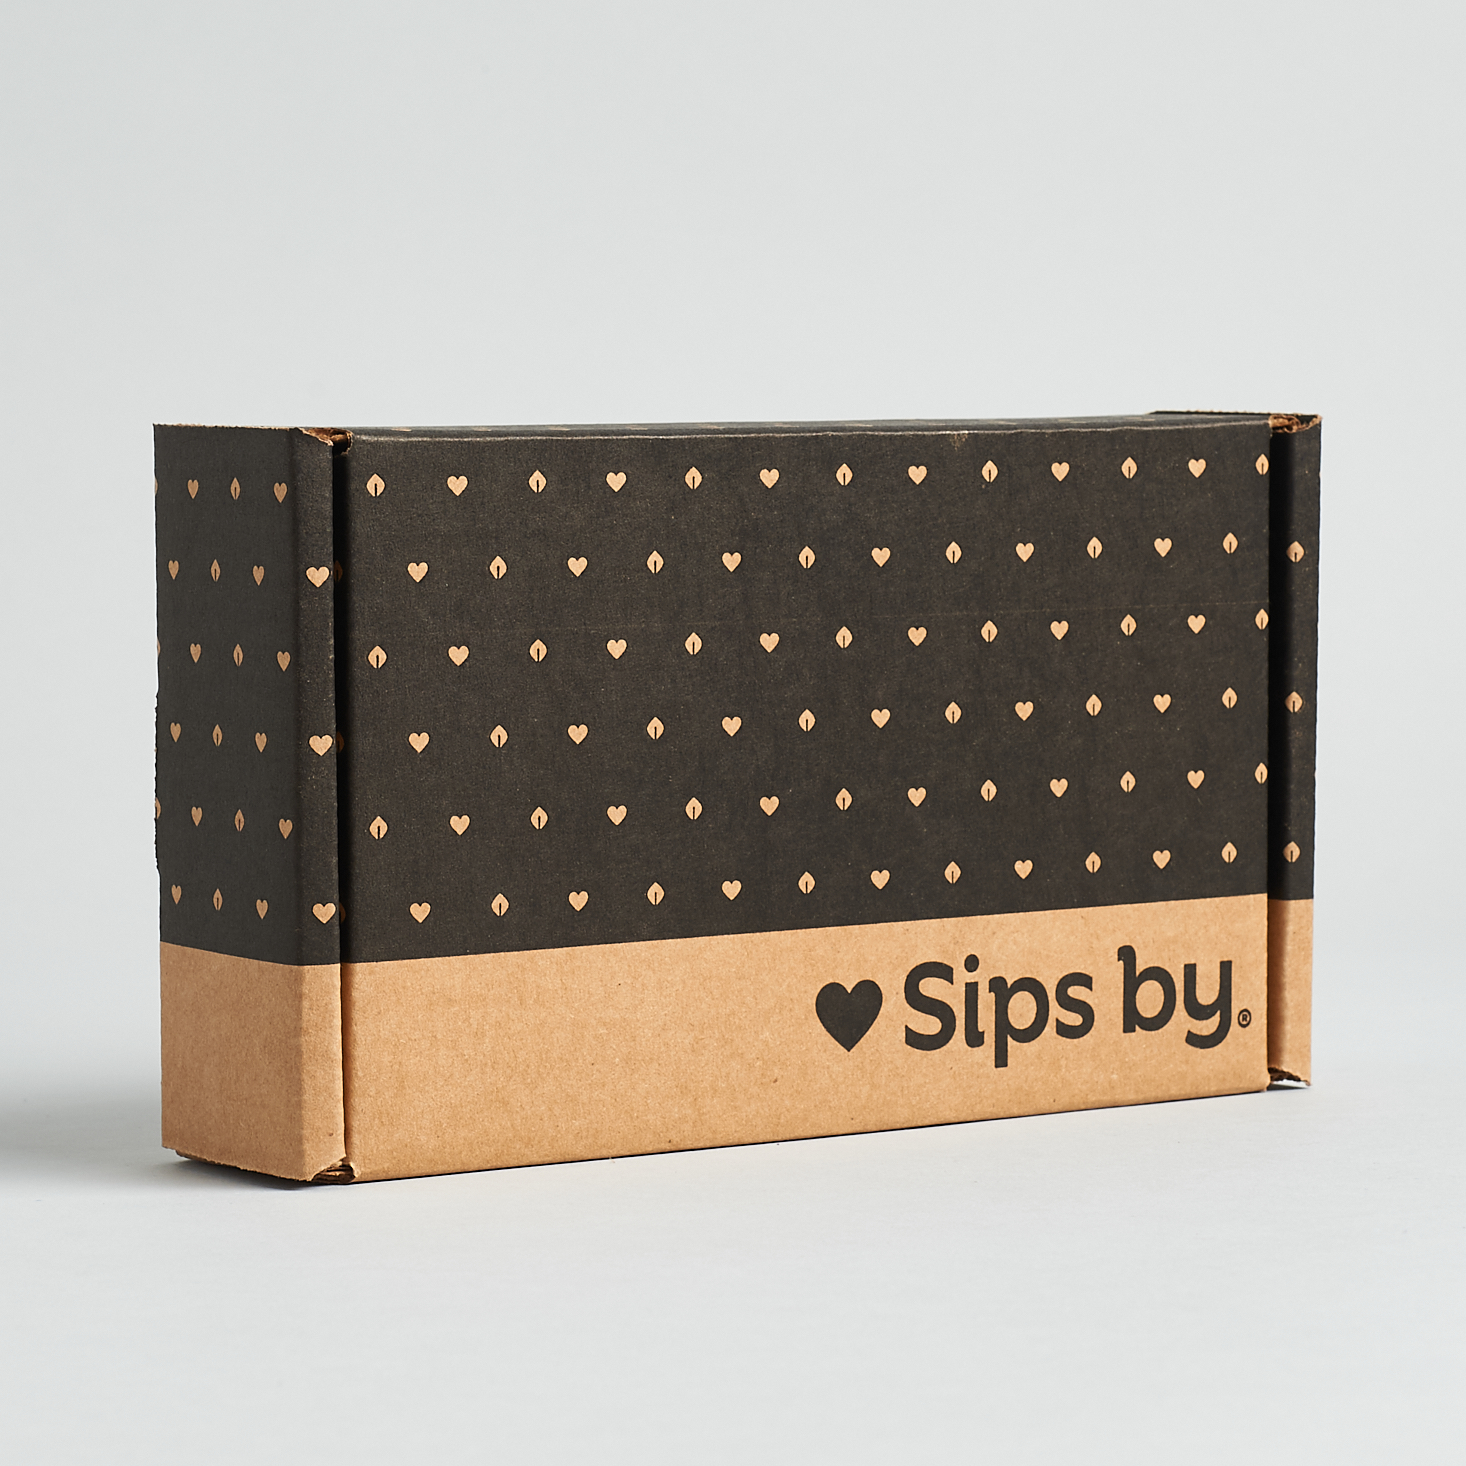 Sips by Valentine’s Day Limited Edition Tea Boxes  – Available Now + Full Spoilers!